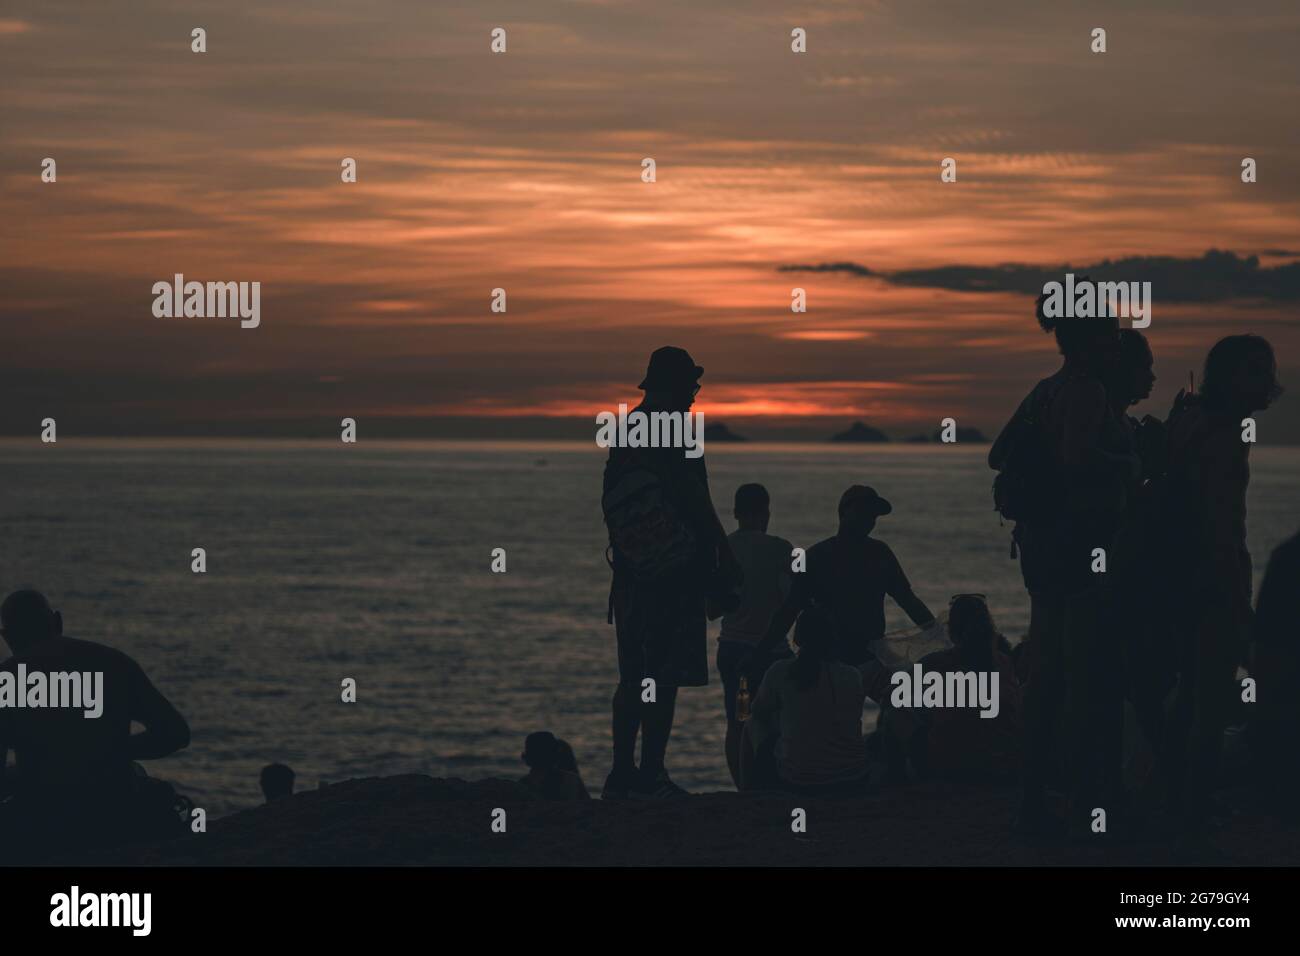 A magical place: People applaud when the sun sets at Arpoador rock with view of Ipanema beach and the Mountains of Morro Dois Irmaos and Leblon in the back. Camera: Leica M10 Stock Photo